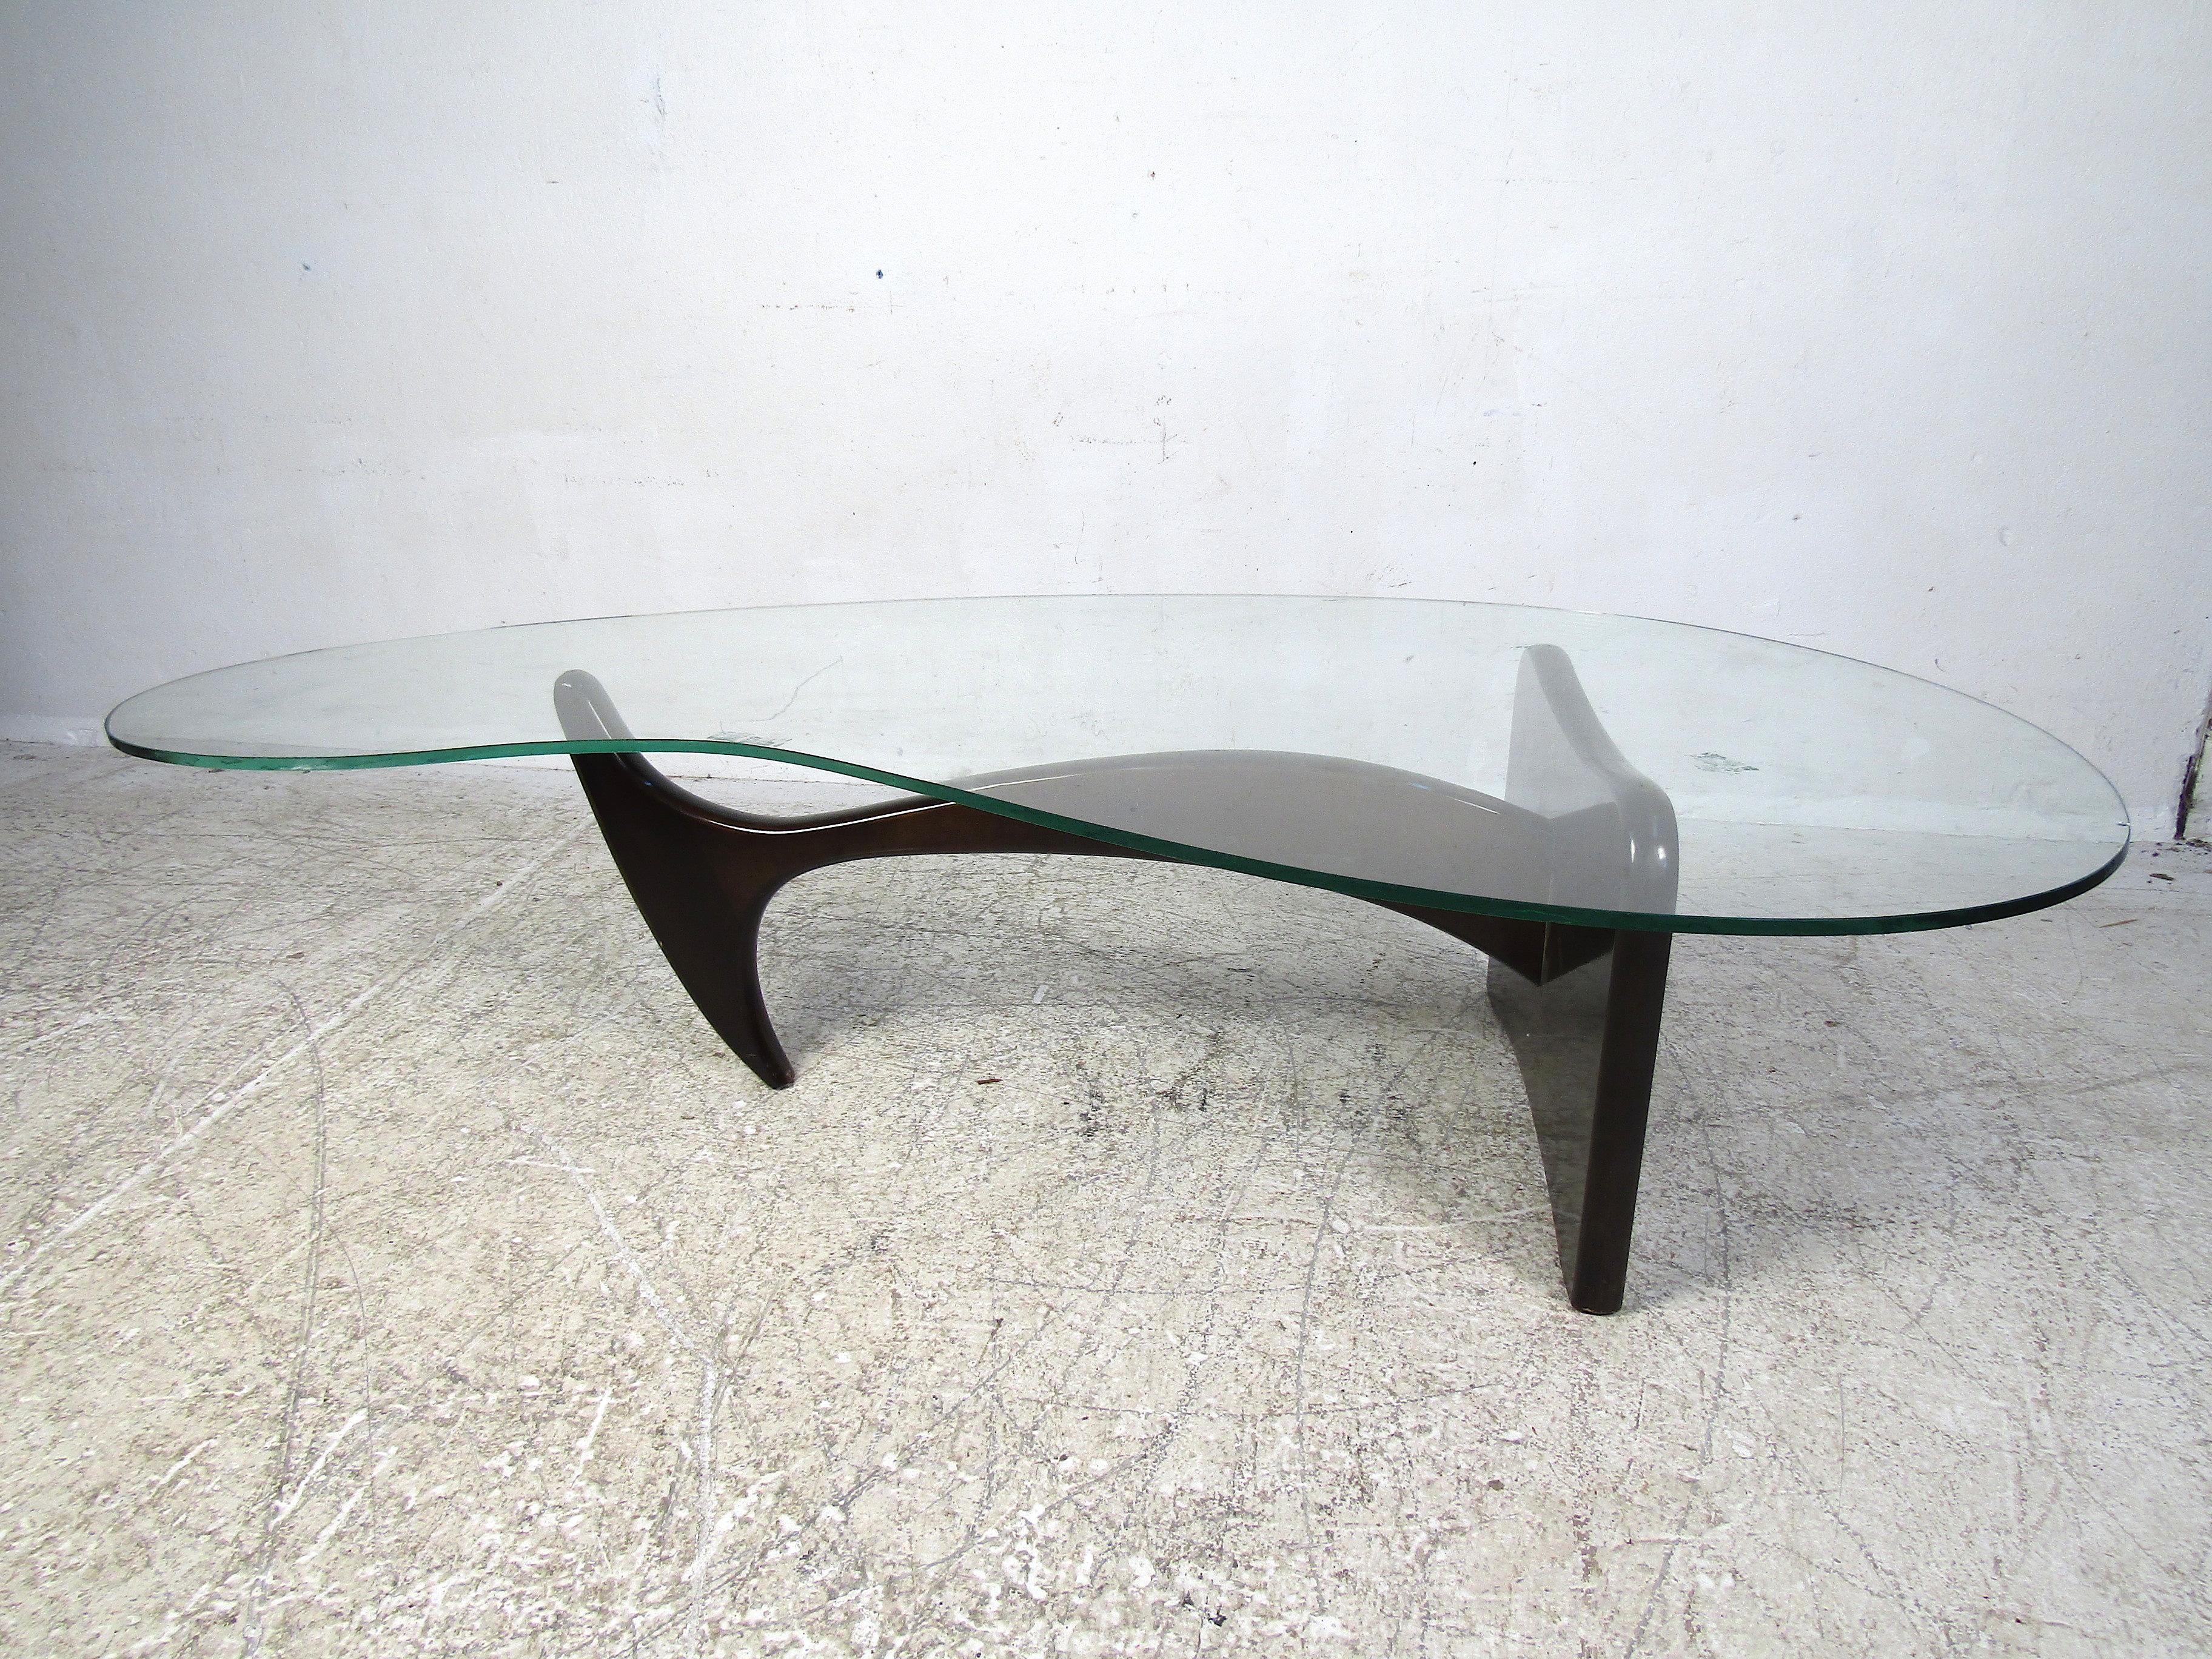 Stylish vintage coffee table with a sculptural wooden base and a large kidney-shaped glass tabletop. This table is sure to prove a great centerpiece to any modern interior's living room or common area. Please confirm the item's location with the